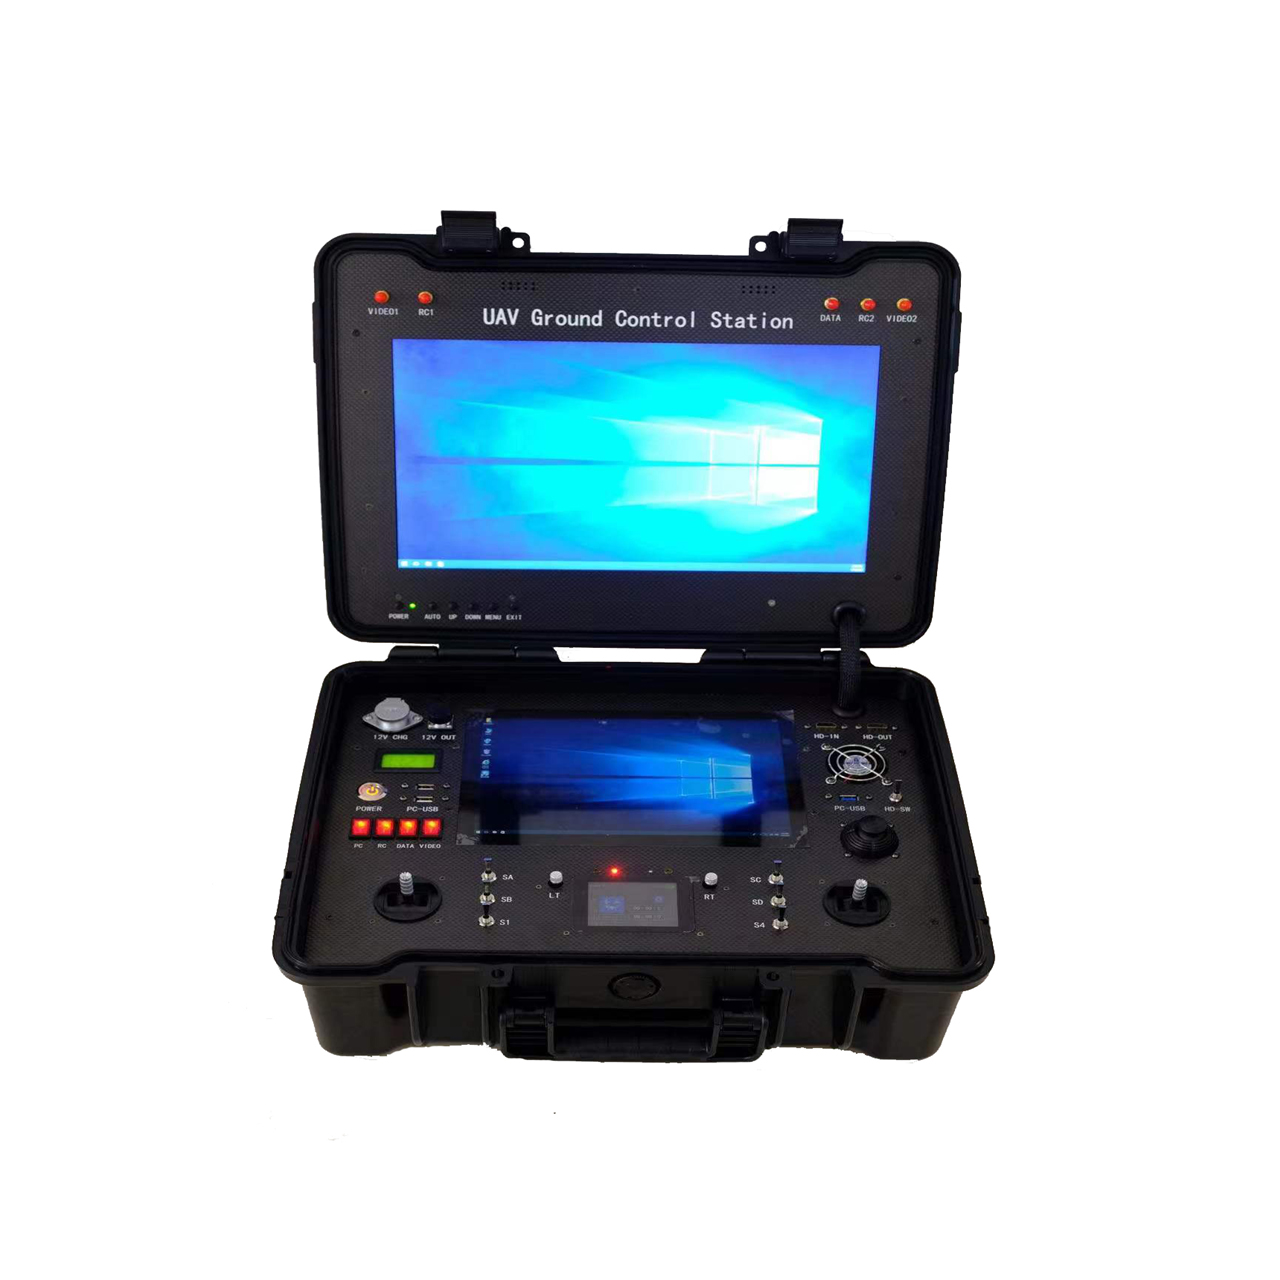 FDPZ-600 high cost-effective industrial drone ground control station customization